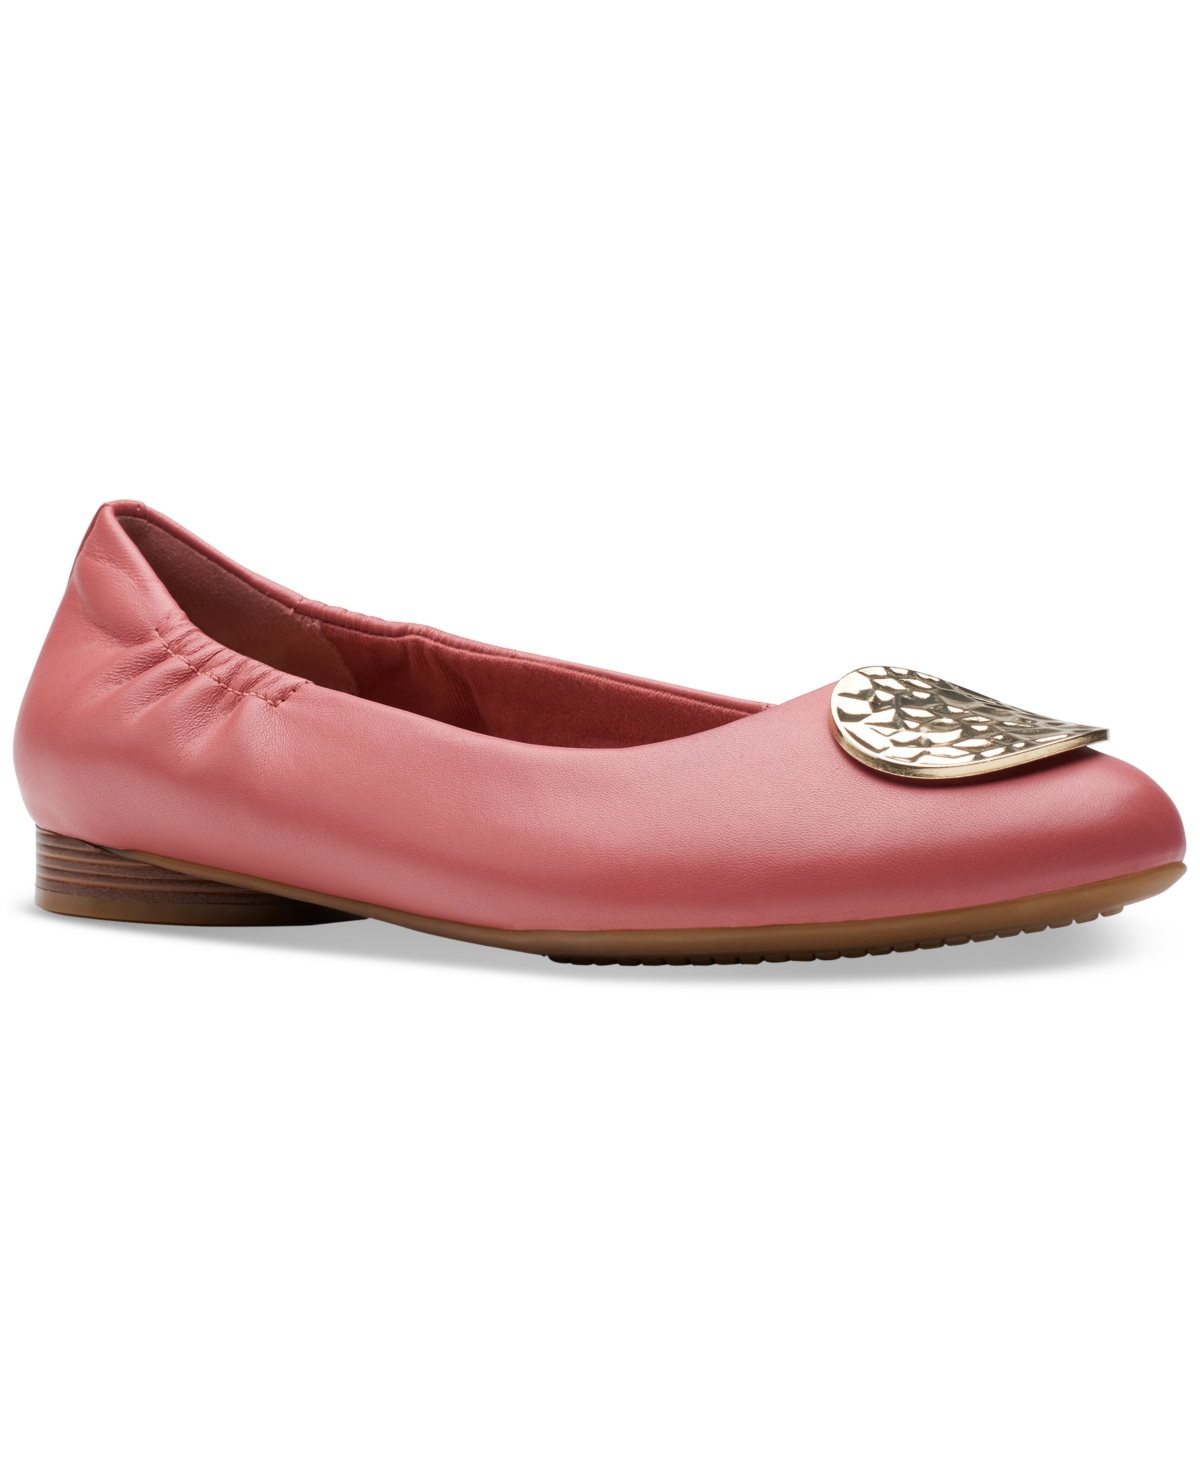 Clarks Women's Loreleigh Ave Ornament-trim Ballet Flats In Dusty Rose Leather